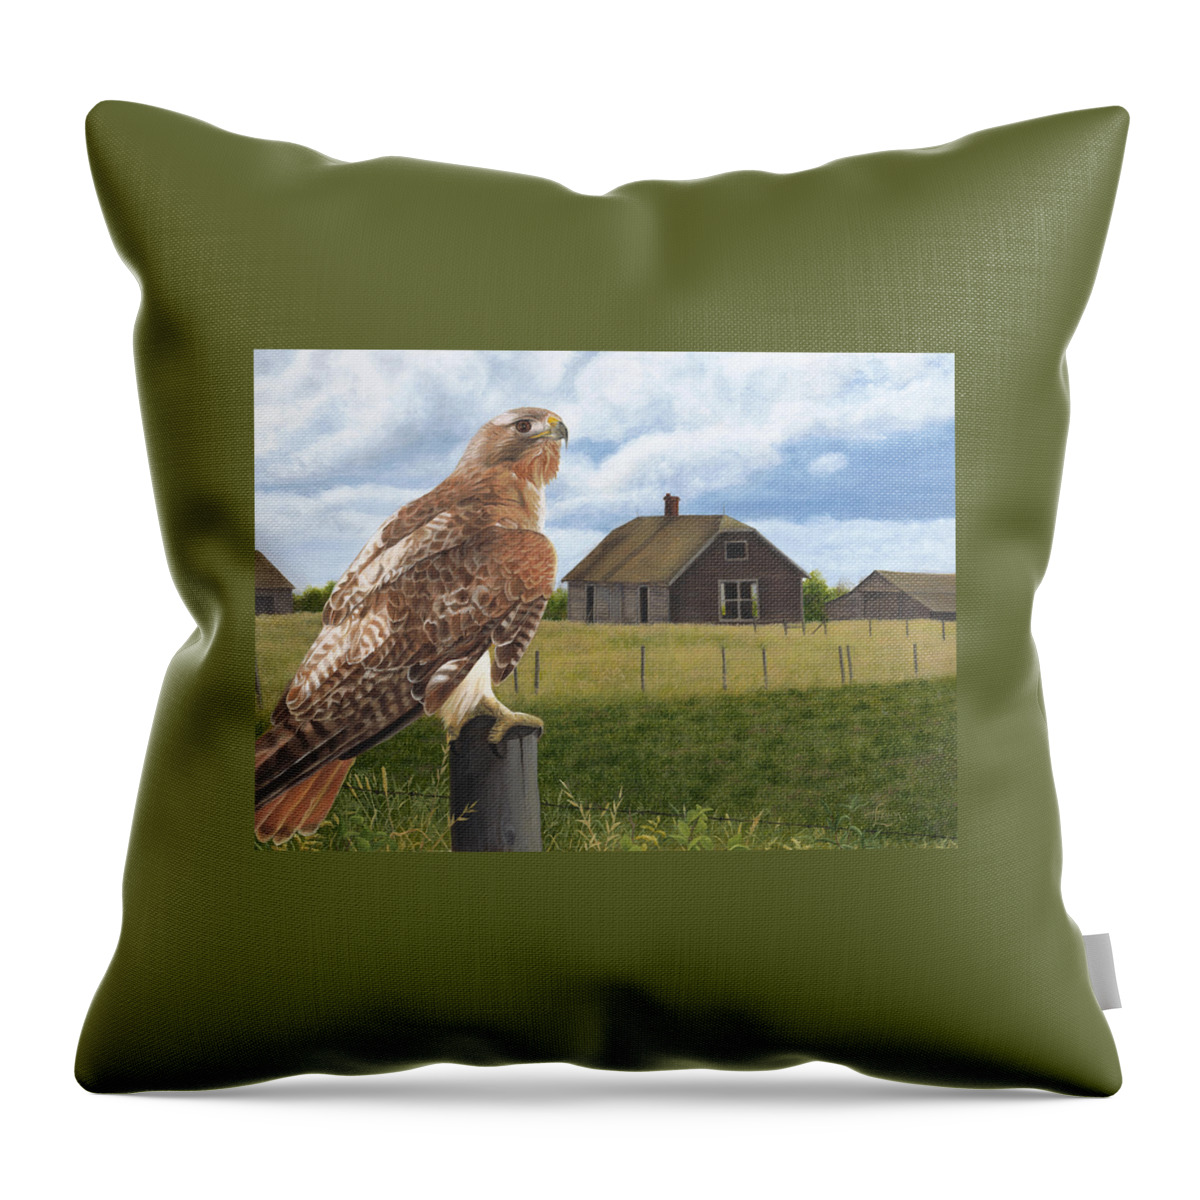 Red Tailed Hawk Over Looking Old Homestead Throw Pillow featuring the painting The Grounds Keeper by Tammy Taylor